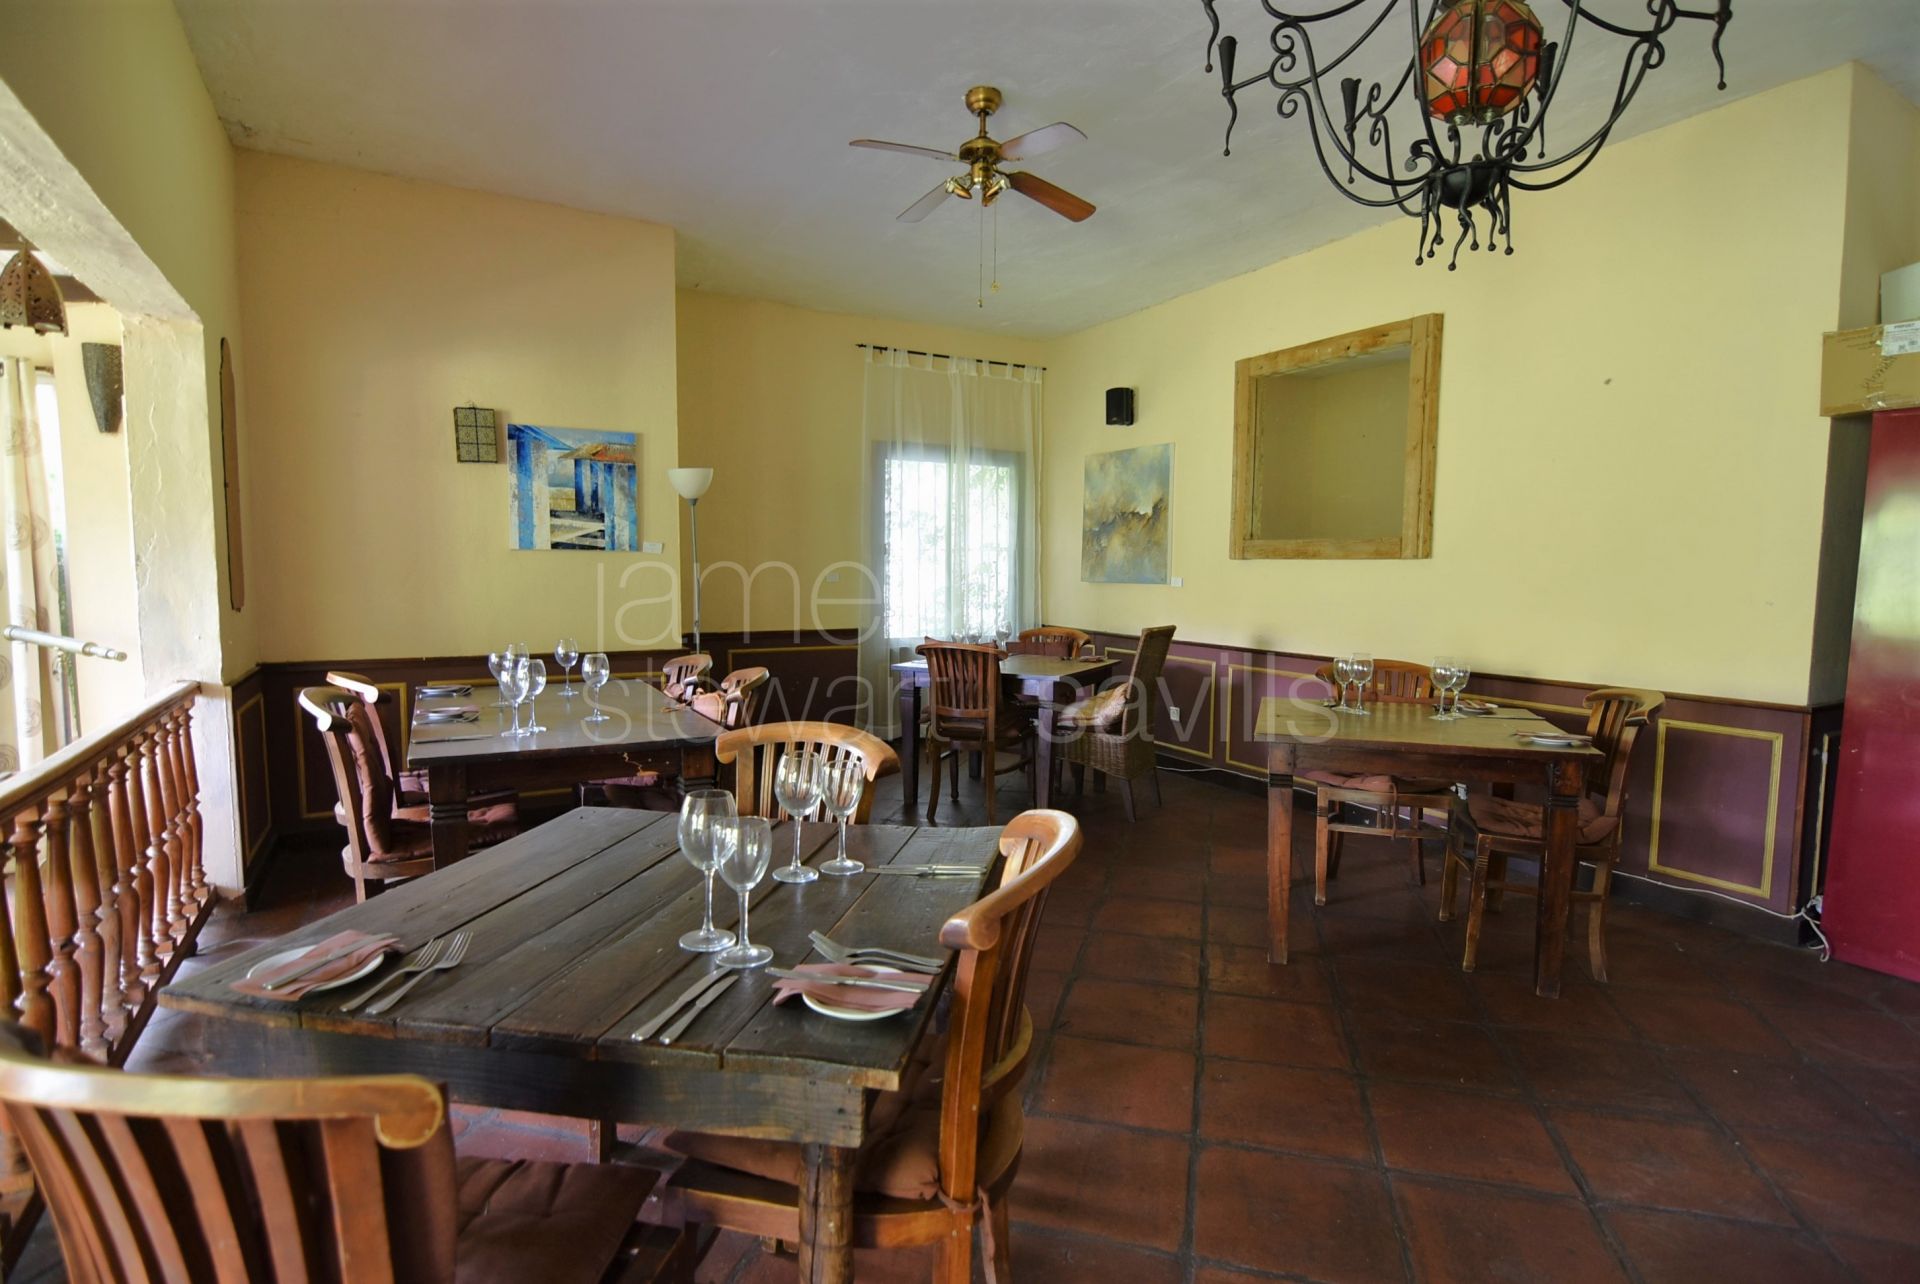 Successful country venta style restaurant for sale 10 minutes from the Costa